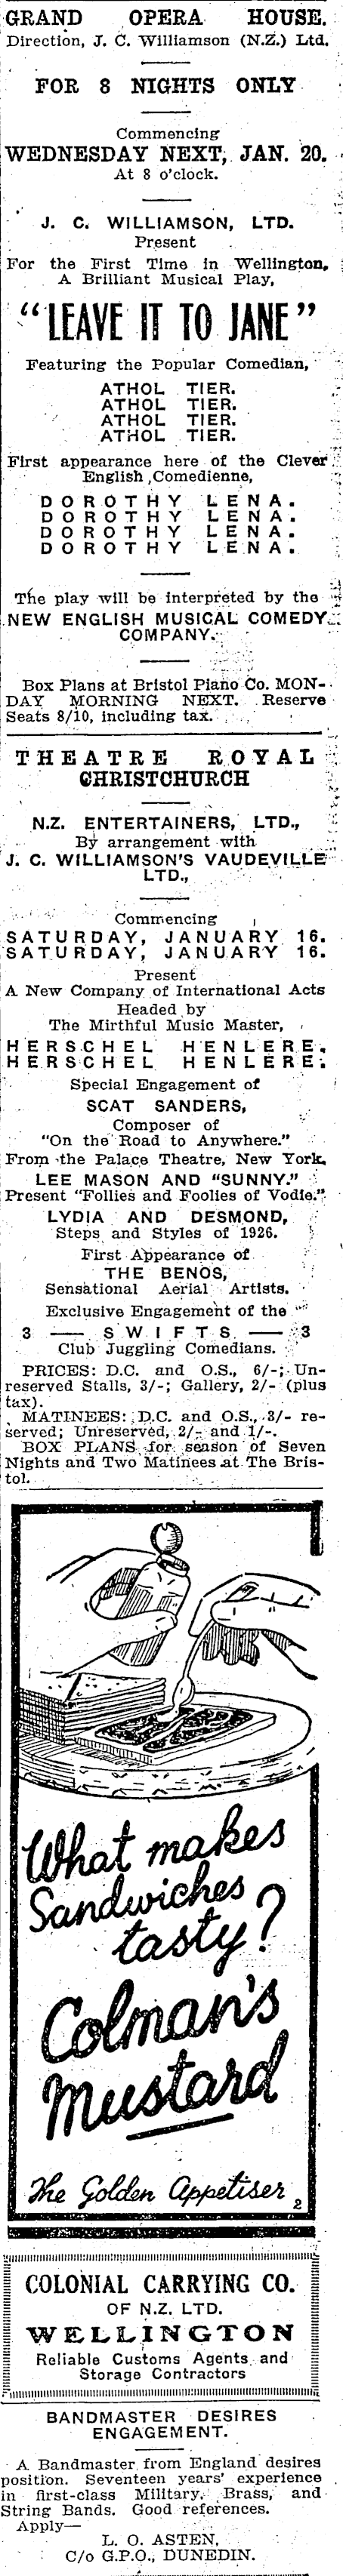 Papers Past Newspapers Nz Truth 14 January 1926 Page 7 Advertisements Column 3